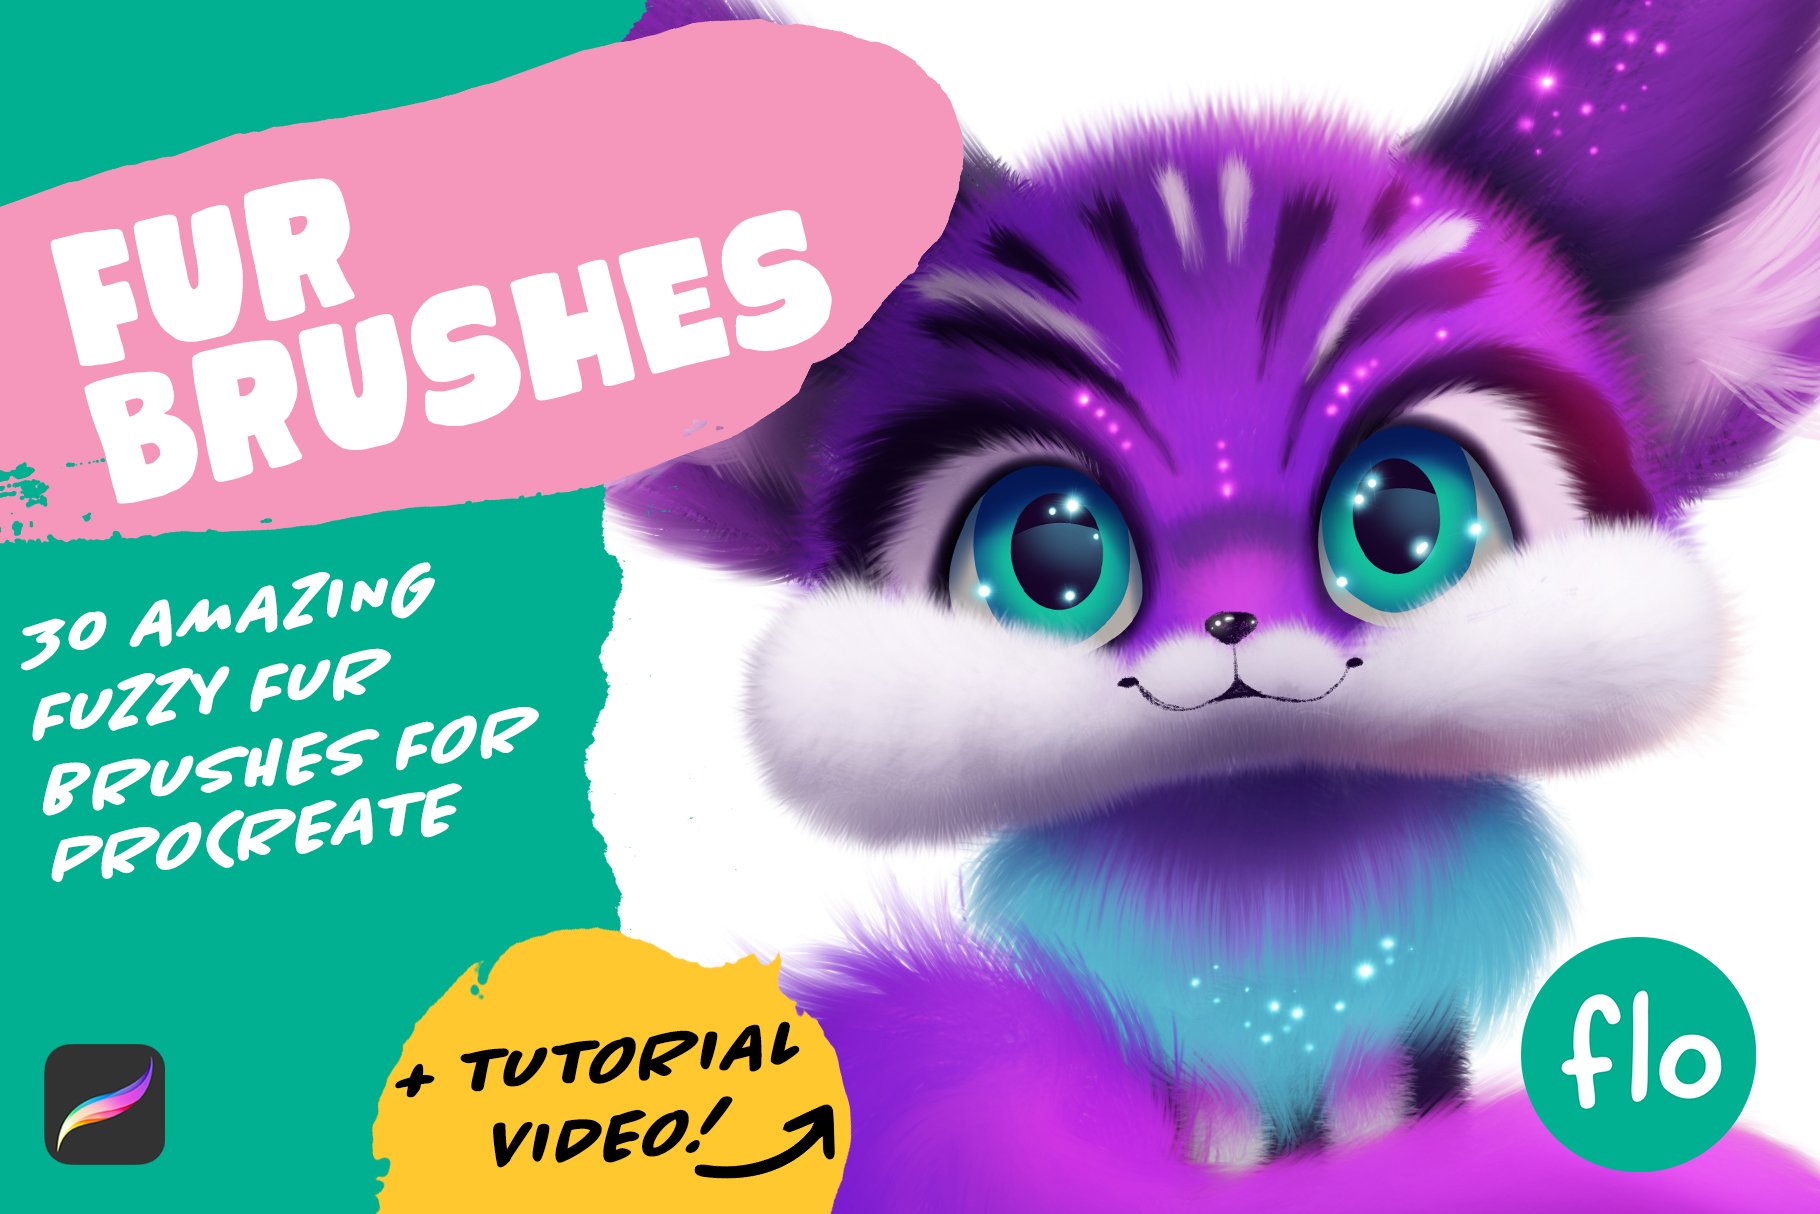 Fur Brushes for Procreate